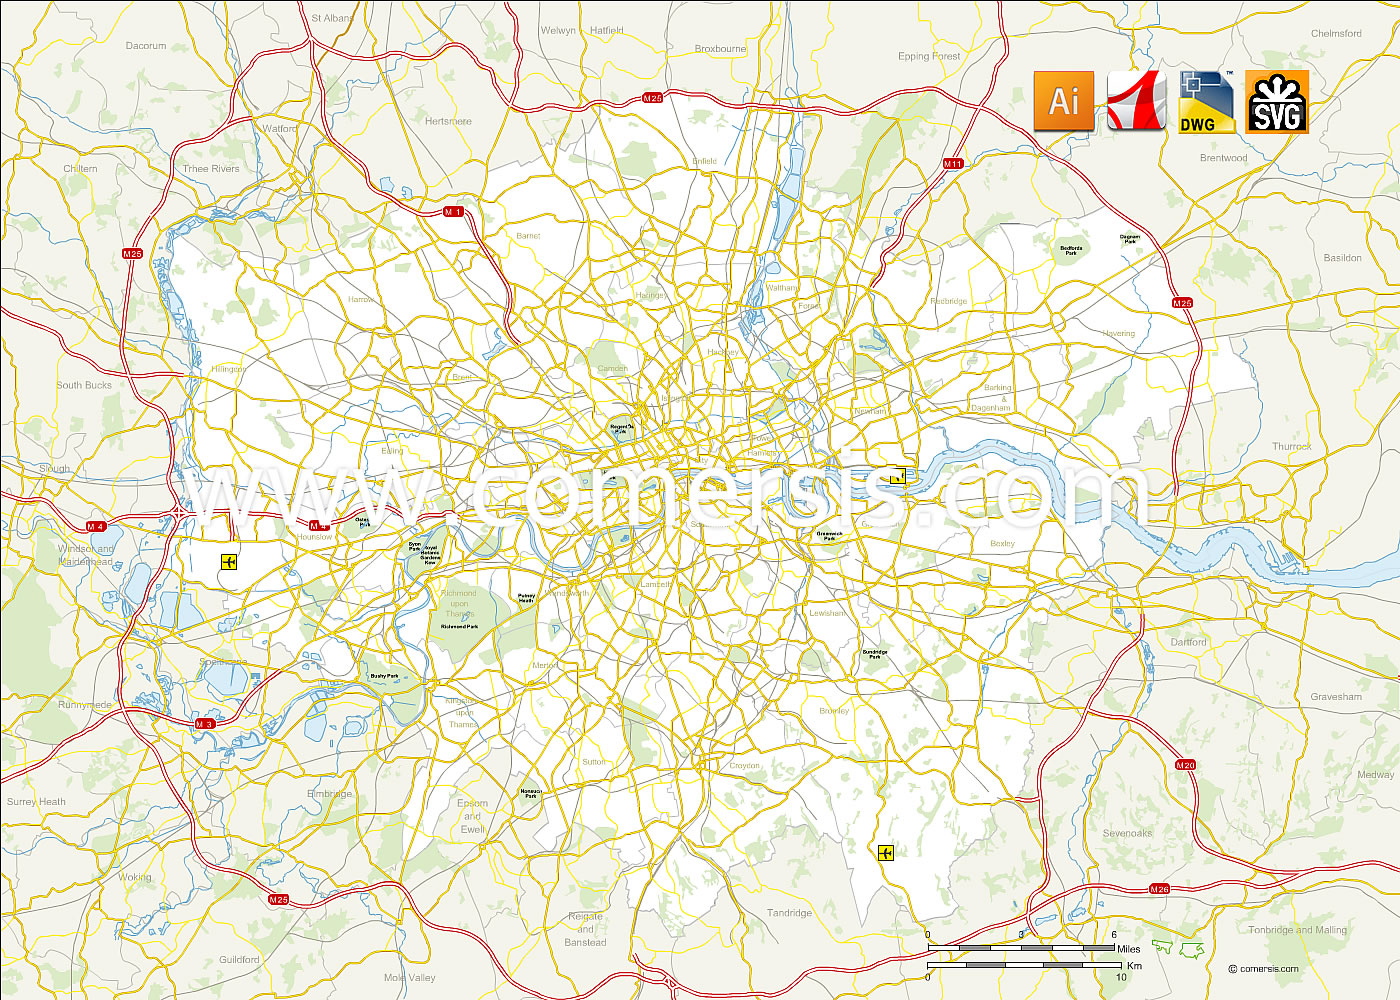 Map of Greater London England